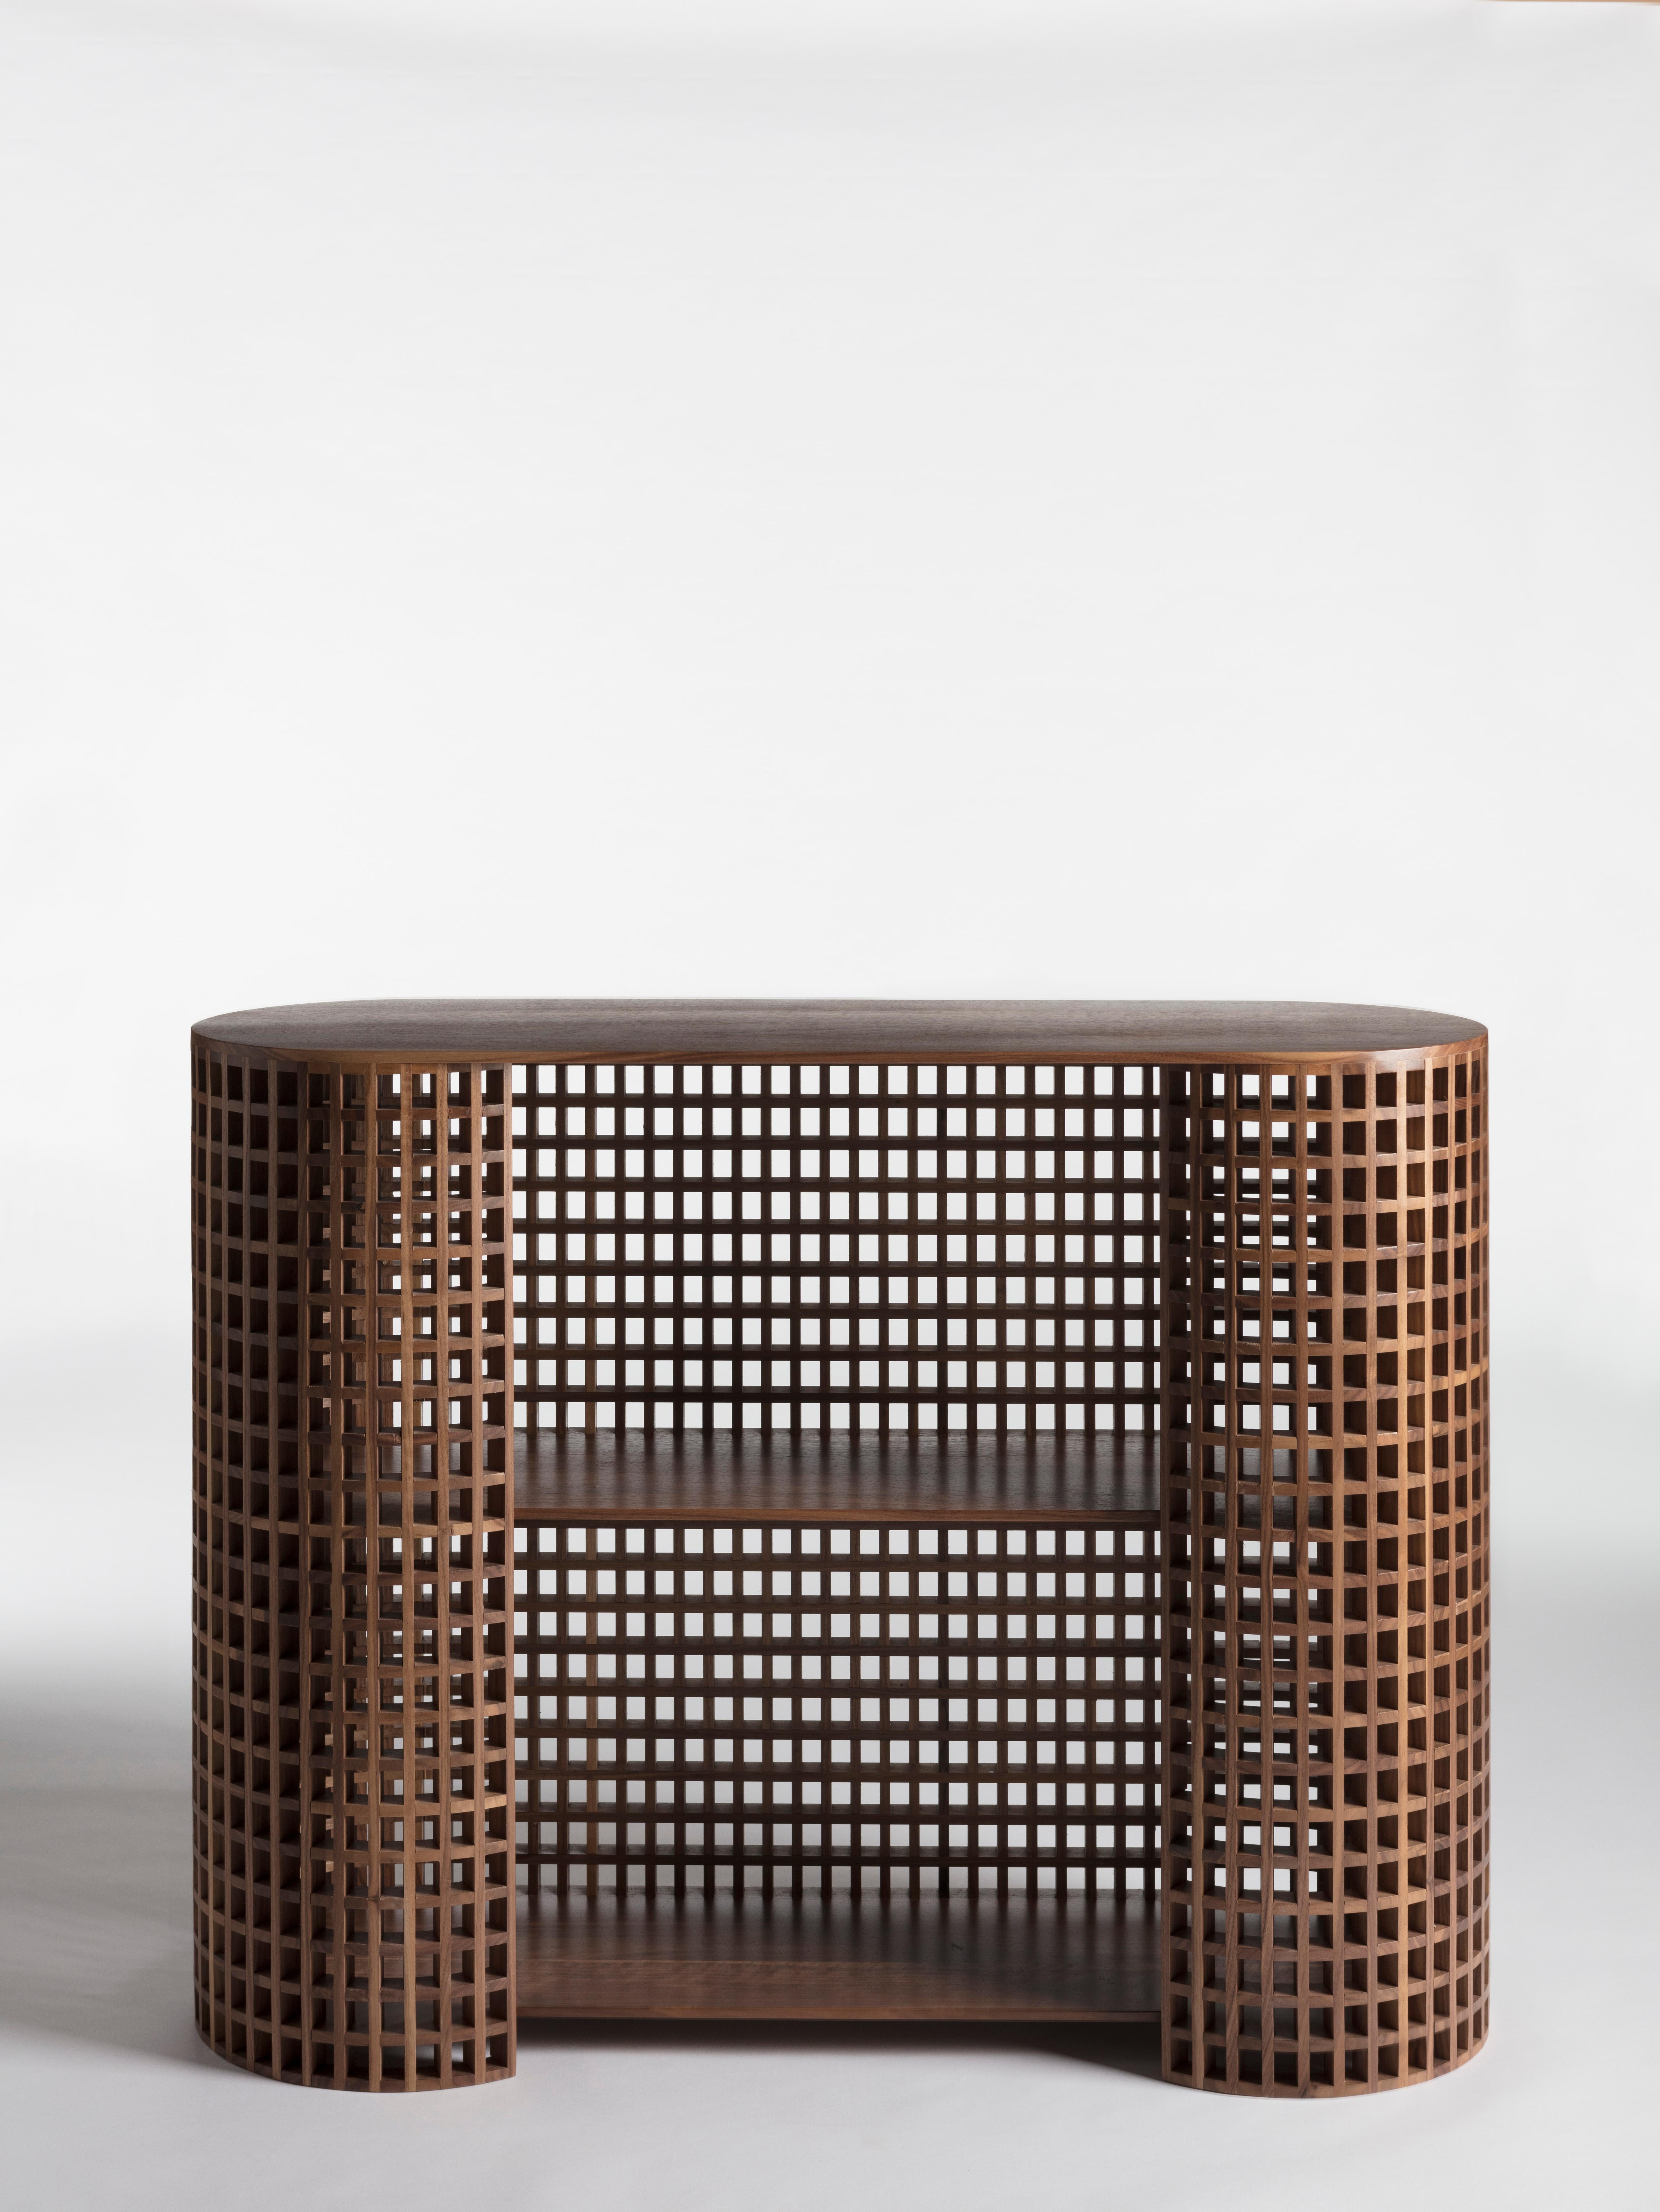 Carabottino is a collection made of a clever play of textures and
transparencies, that makes these objects the centerpiece of any environment. A
storage unit, a mirror or a table that establishes a dialogue between inside and
outside.
A wooden